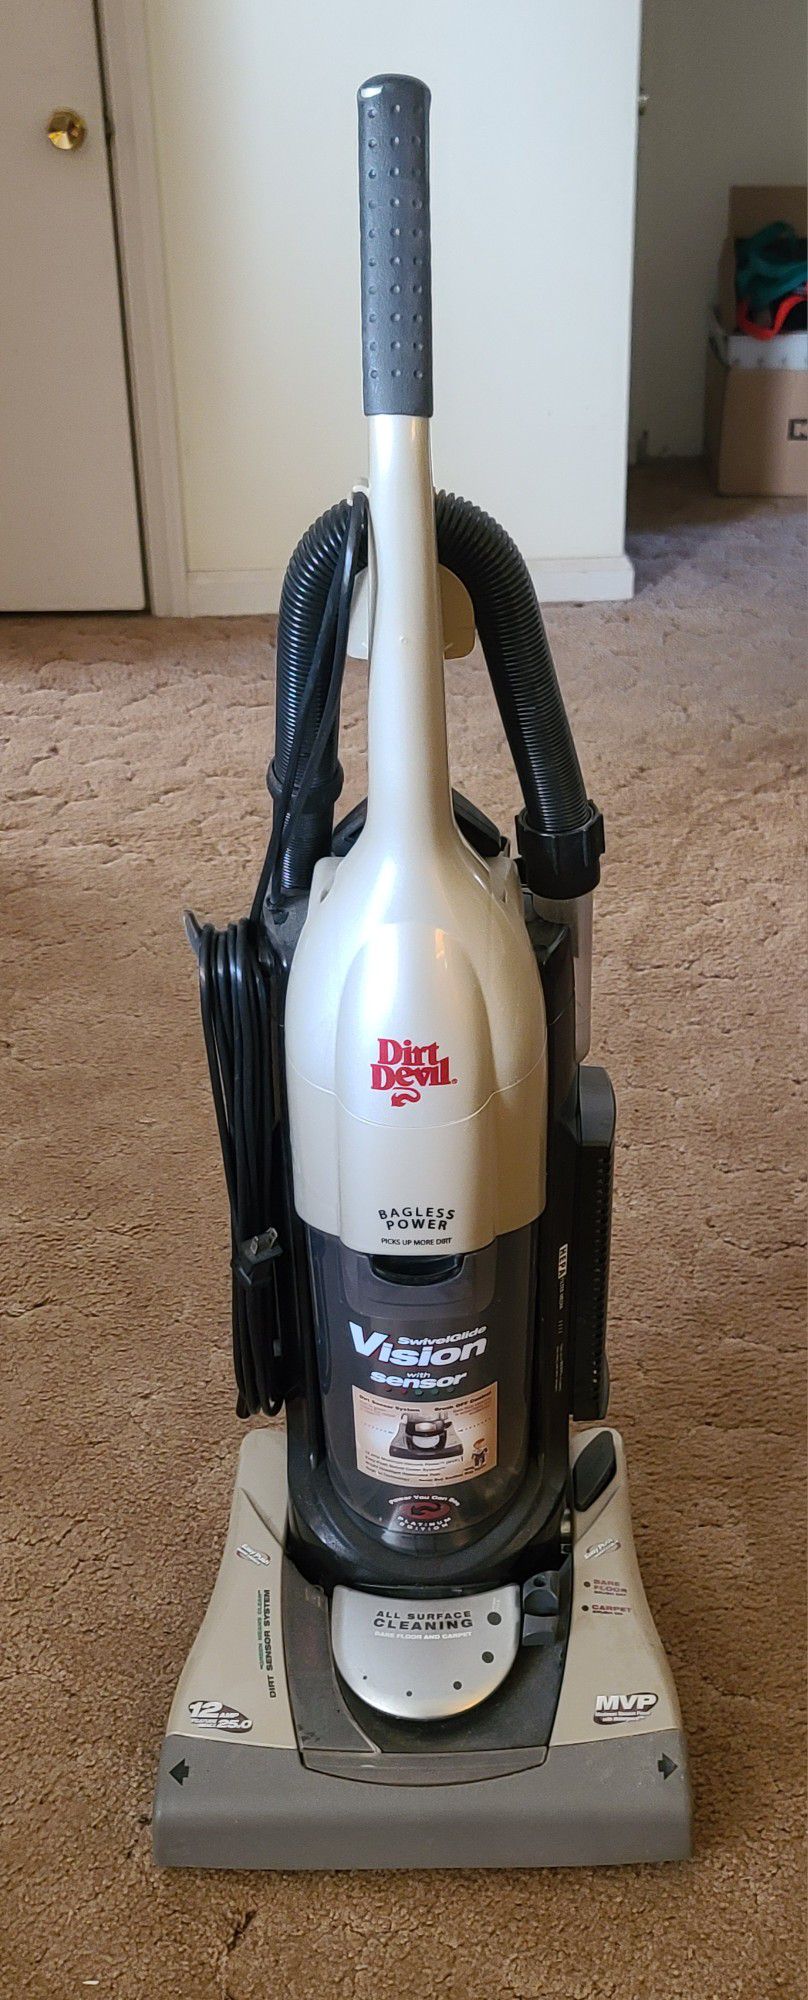 ROYAL DIRT DEVIL VACCUM MODEL 089900 WITH ATTACHMENTS - WORKS GREAT 